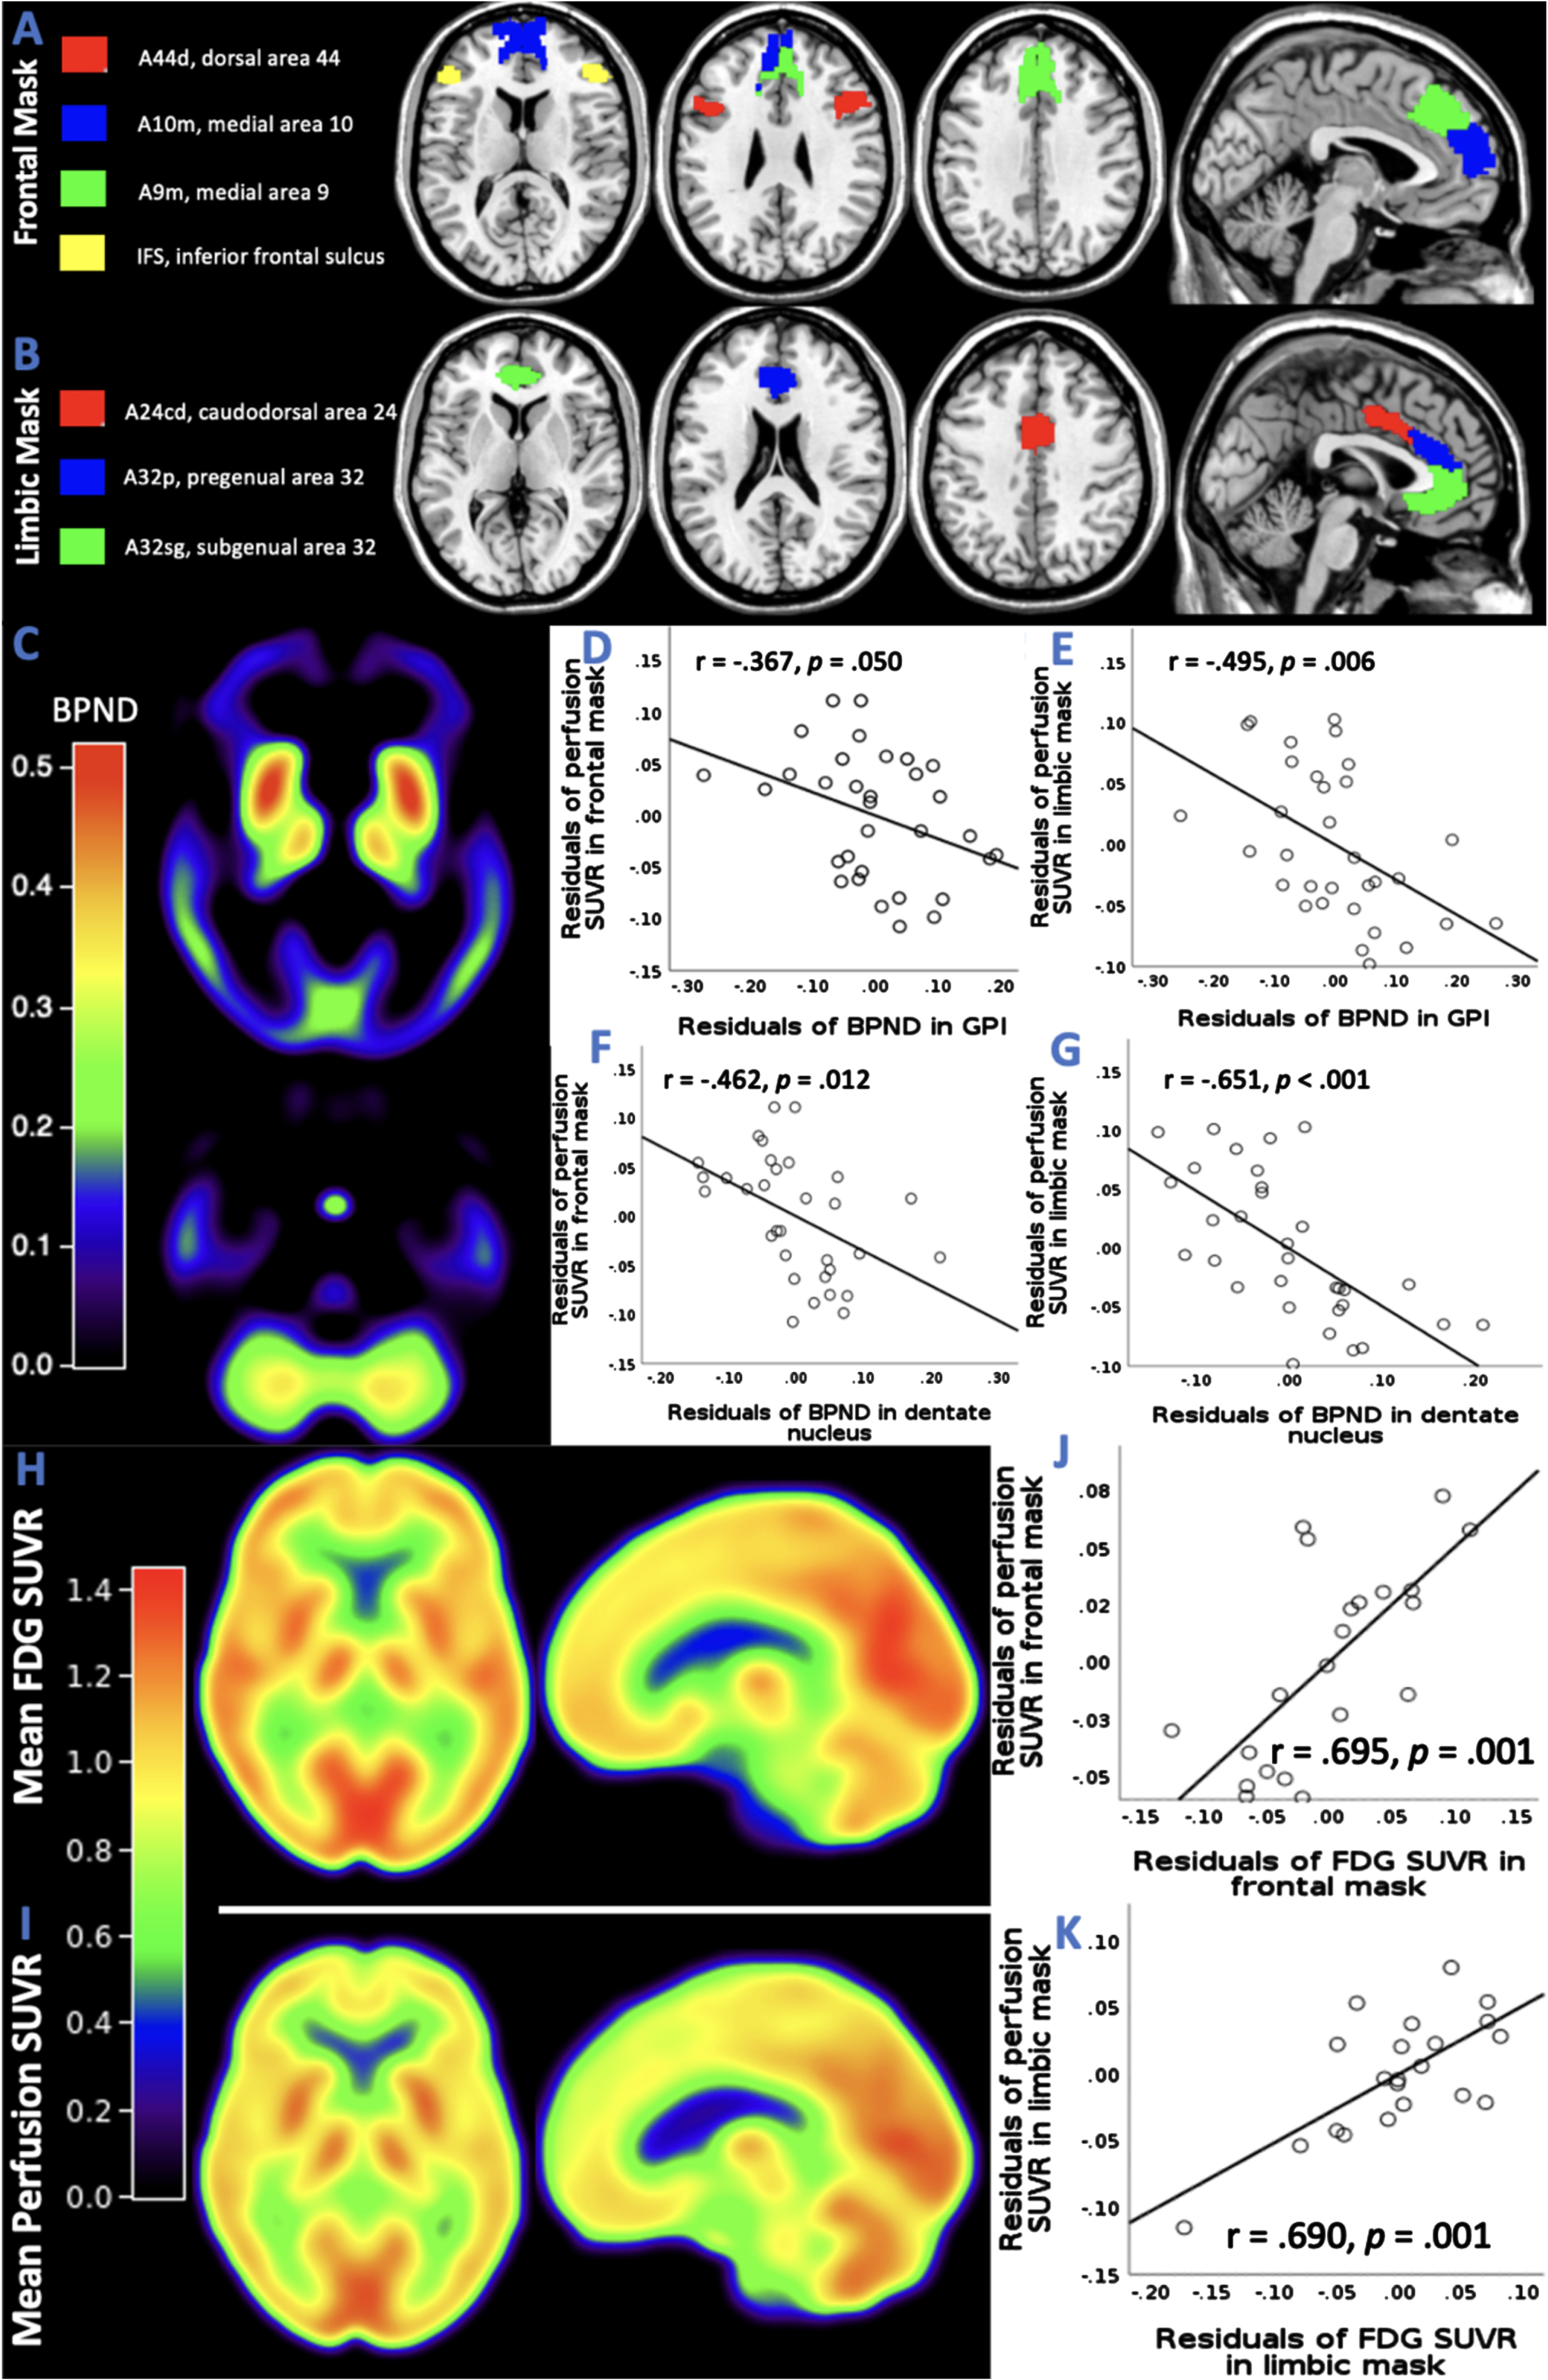 
Link between subcortical tau and cortical dysfunction in PSP. A frontal mask A) and a limbic mask B) were created by including regions of the Brainnetome atlas,10 where patients with PSP had significant hypoperfusion in previous work.6 C) Mean BPND maps in the PSP cohort showing a typical pattern of tau depositions in subcortical regions. D-G) Partial correlation analyses between BPND in GPI and dentate and perfusion SUVR in frontal and limbic mask corrected for age, sex and BPND in respective cortical mask. For visualization, scatterplots of the residuals of BPND and SUVR in the corresponding region were created. H) Mean perfusion SUVR map of [18F]PI-2620. I) Mean SUVR map of [18F]FDG. SUVR were calculated with the cerebellum excluding the dentate nucleus as reference region. J, K) Partial correlation analyses between perfusion SUVR and FDG SUVR in frontal and limbic mask corrected for age and sex. For visualization, scatterplots of the residuals of PDG and perfusion in the corresponding region were created.